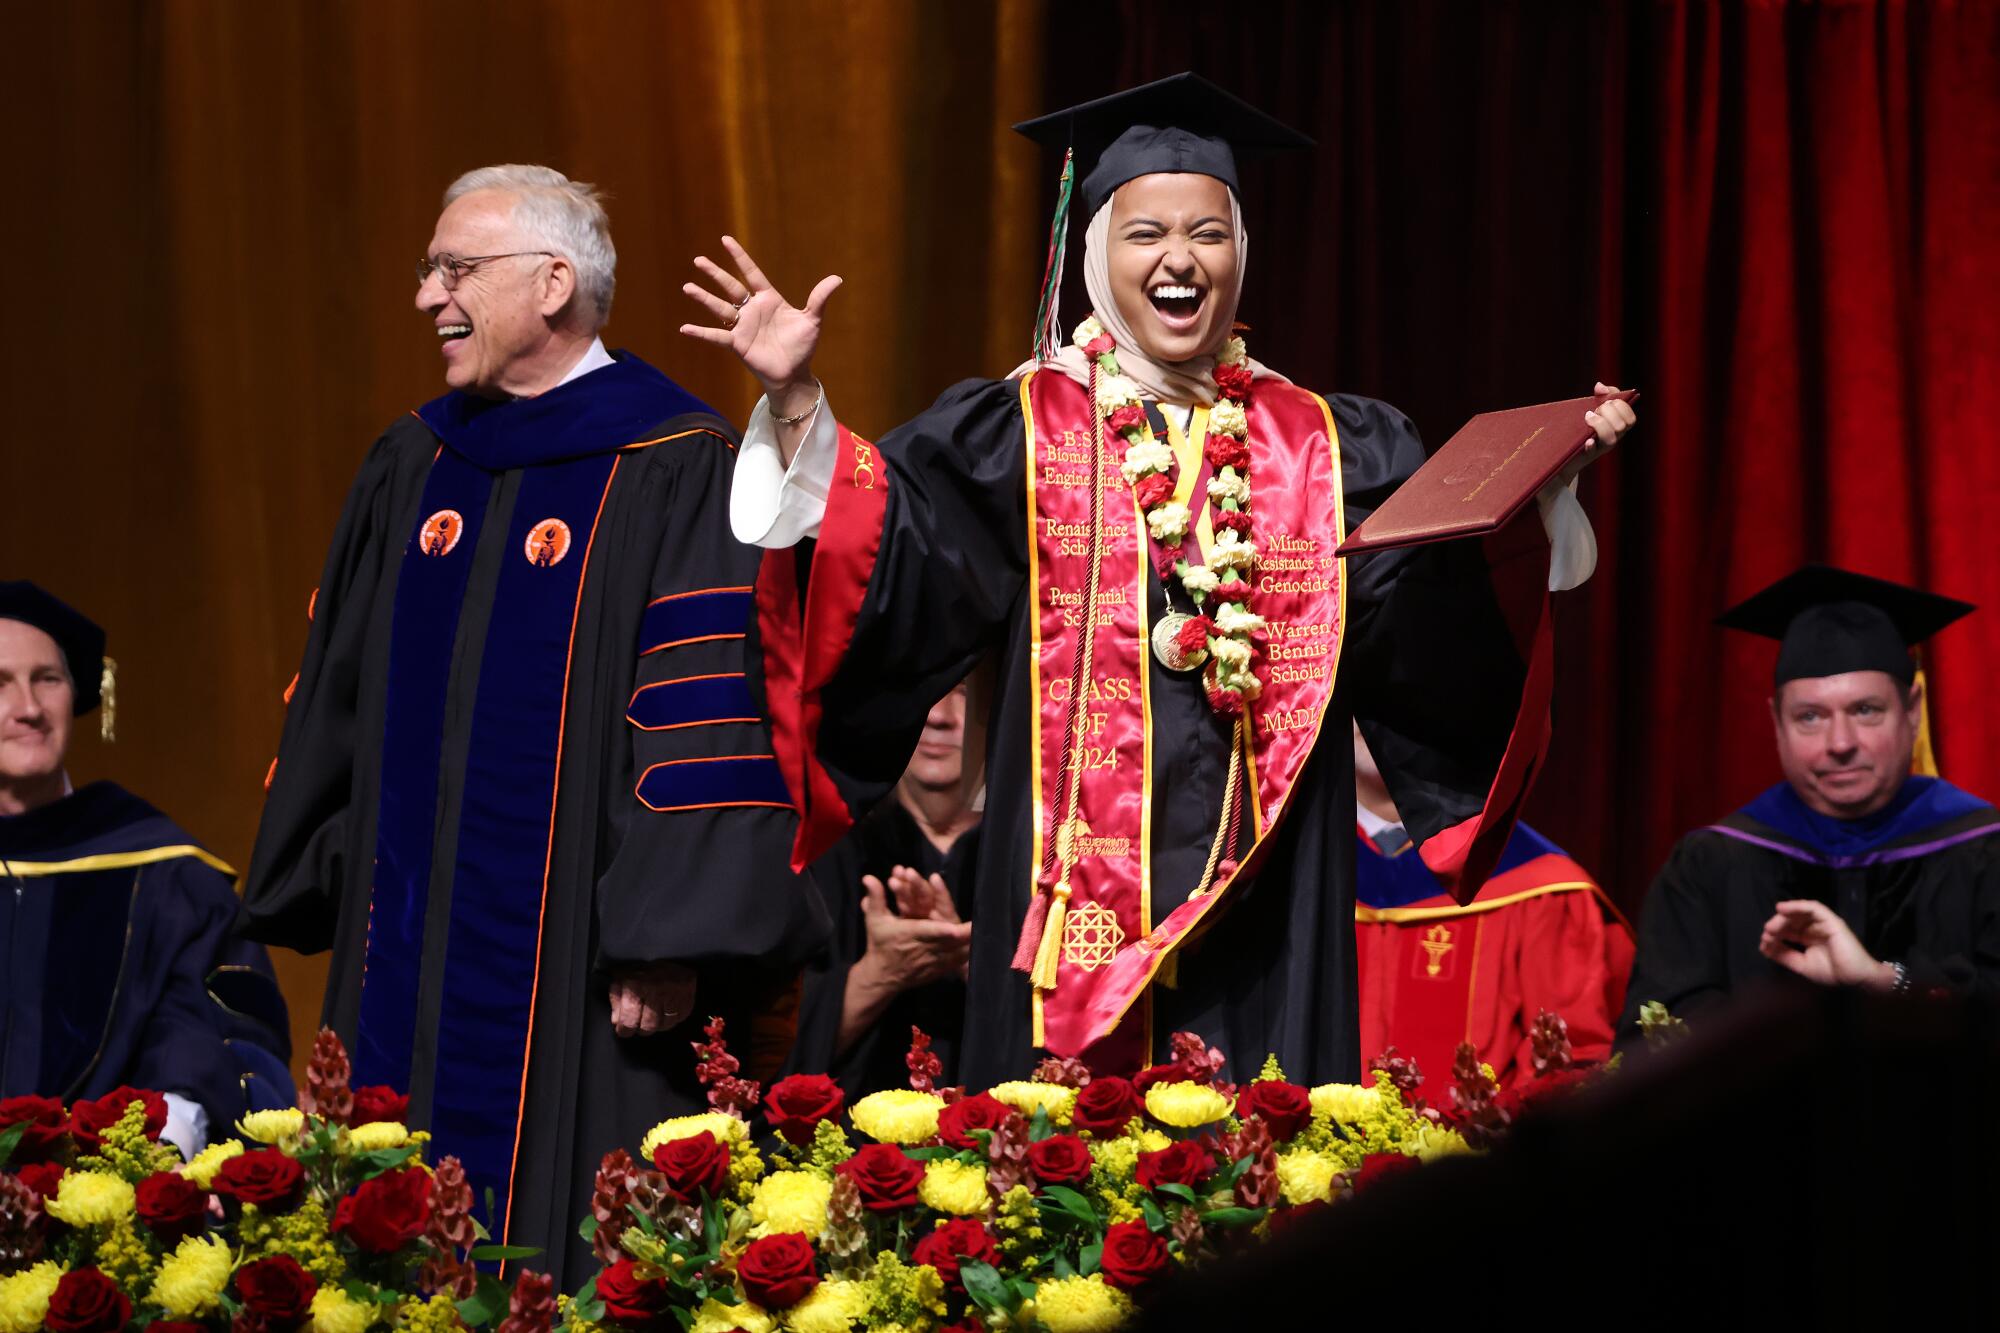 USC valedictorian Asna Tabassum smiles as she gestures and receives her diploma onstage